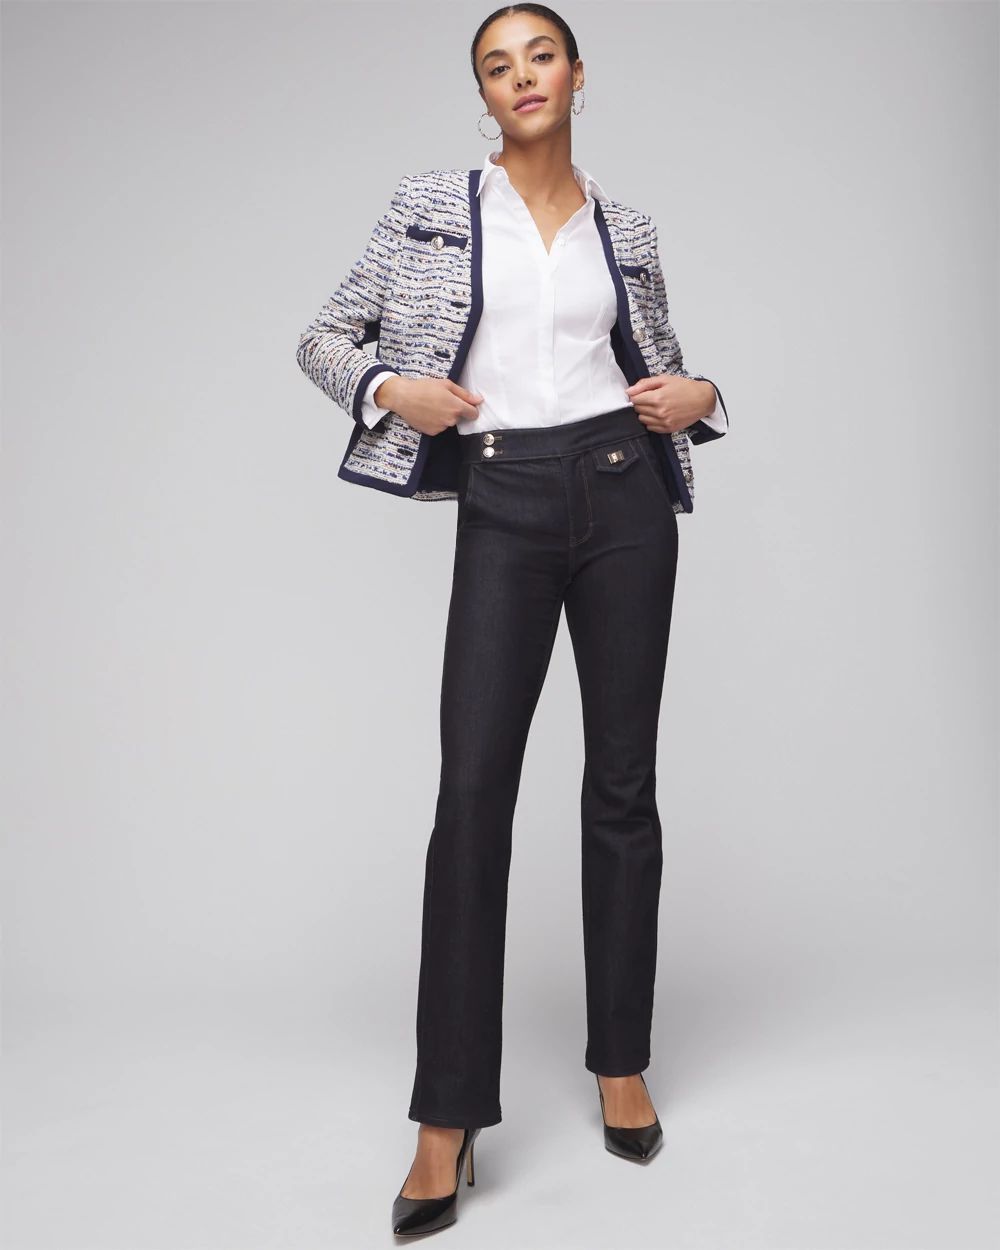 Petite Long Sleeve Seamed Detail Poplin Shirt click to view larger image.